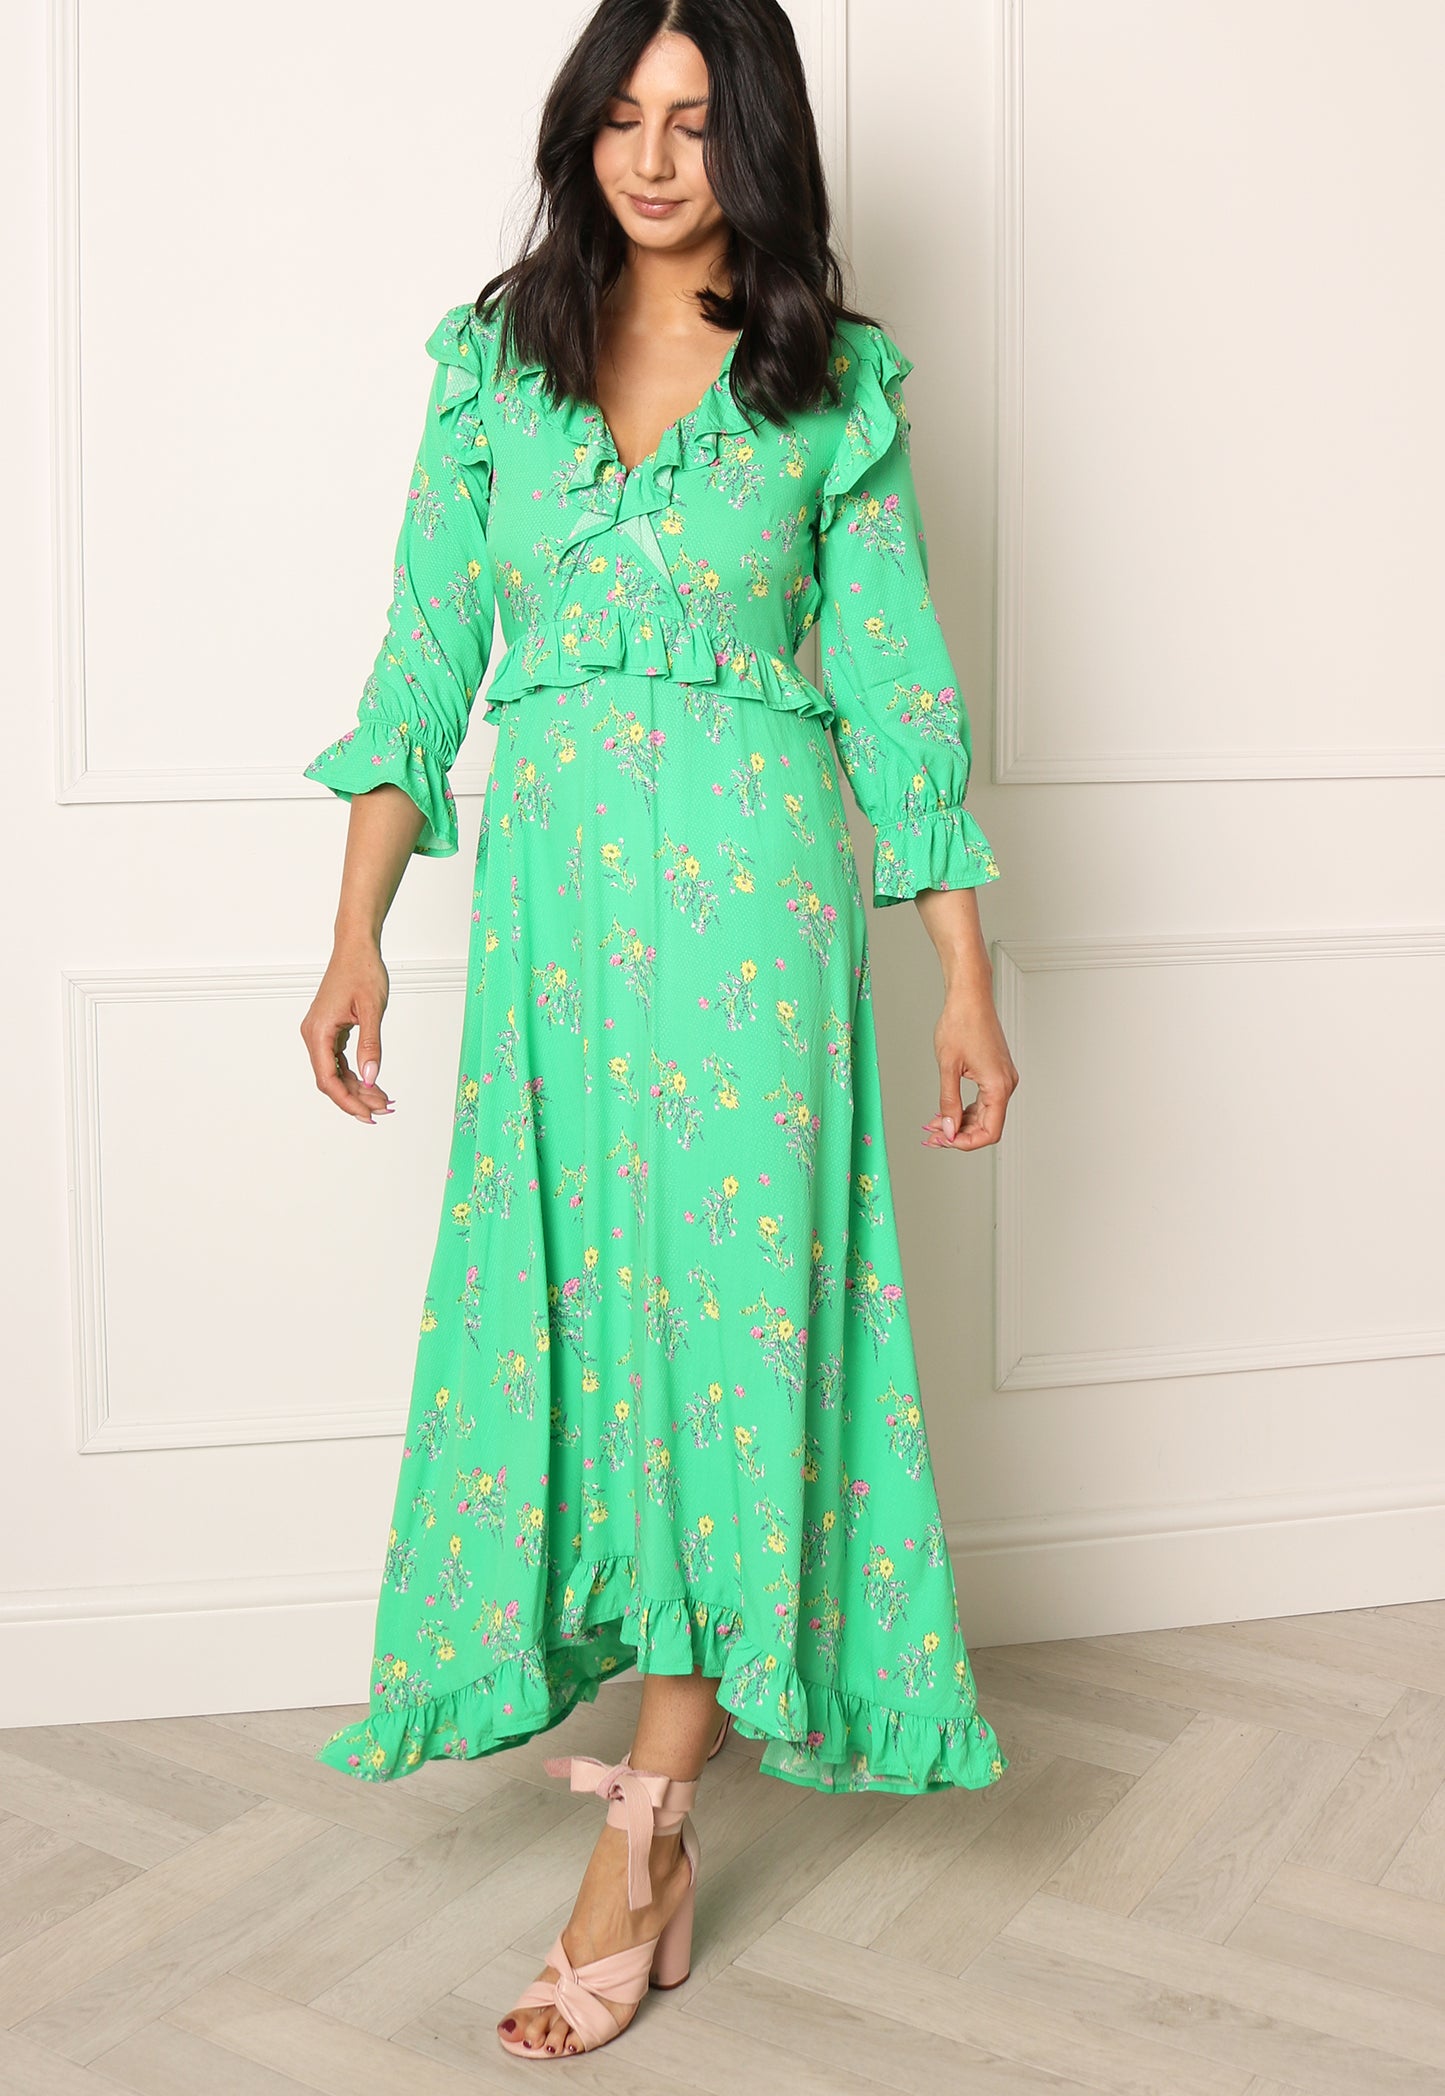 YAS Ofelia Floral Print Midaxi Dress with Frill Details in Bright Green - vietnamzoom